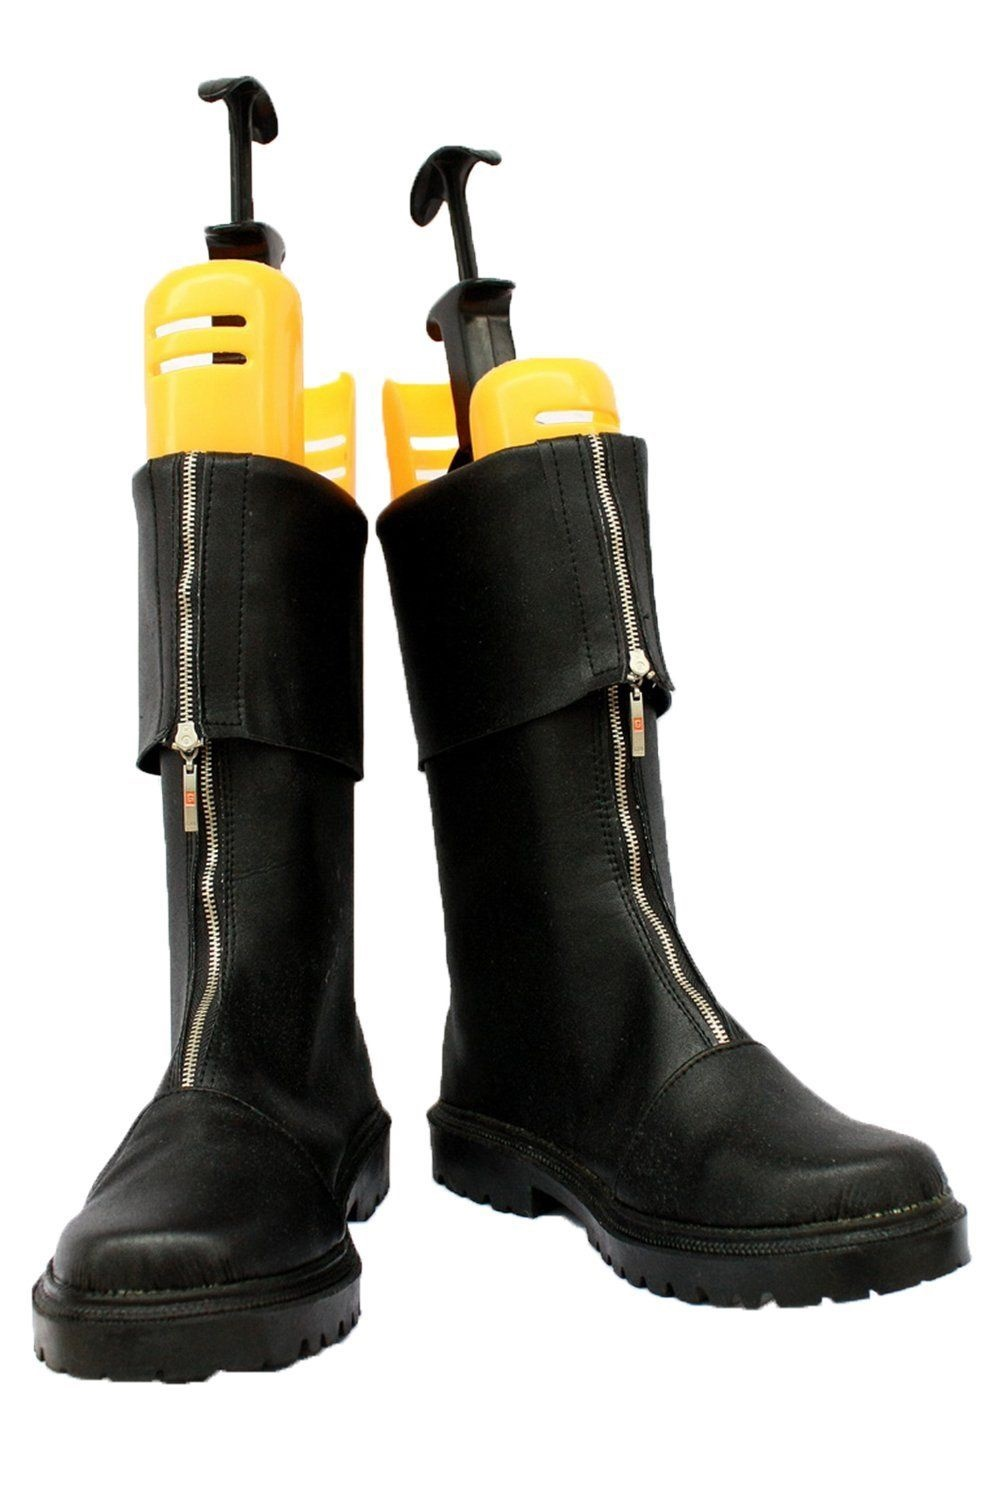 Final Fantasy Vii 7 Zack Fair Cosplay Boots Shoes